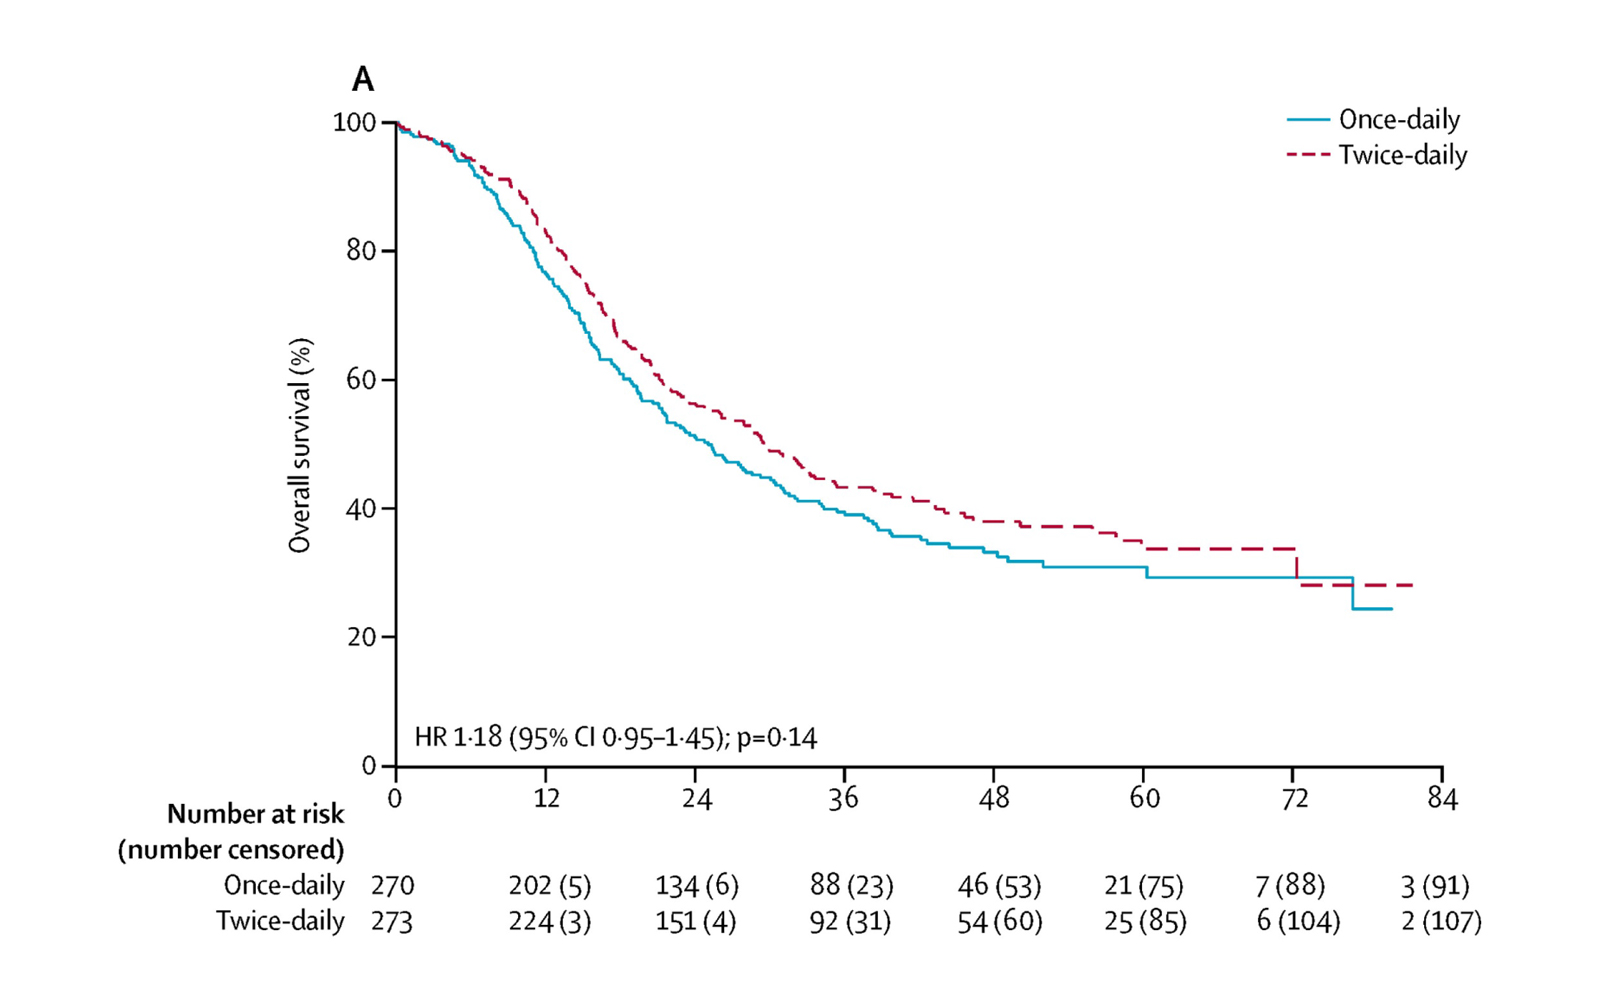 CONVERT: An International Randomized Trial of Concurrent Chemo-Radiotherapy Comparing Twice-Daily and
            Once-Daily Radiotherapy Schedules in Patients with Limited-Stage Small Cell Lung Cancer and Good Performance
            Status